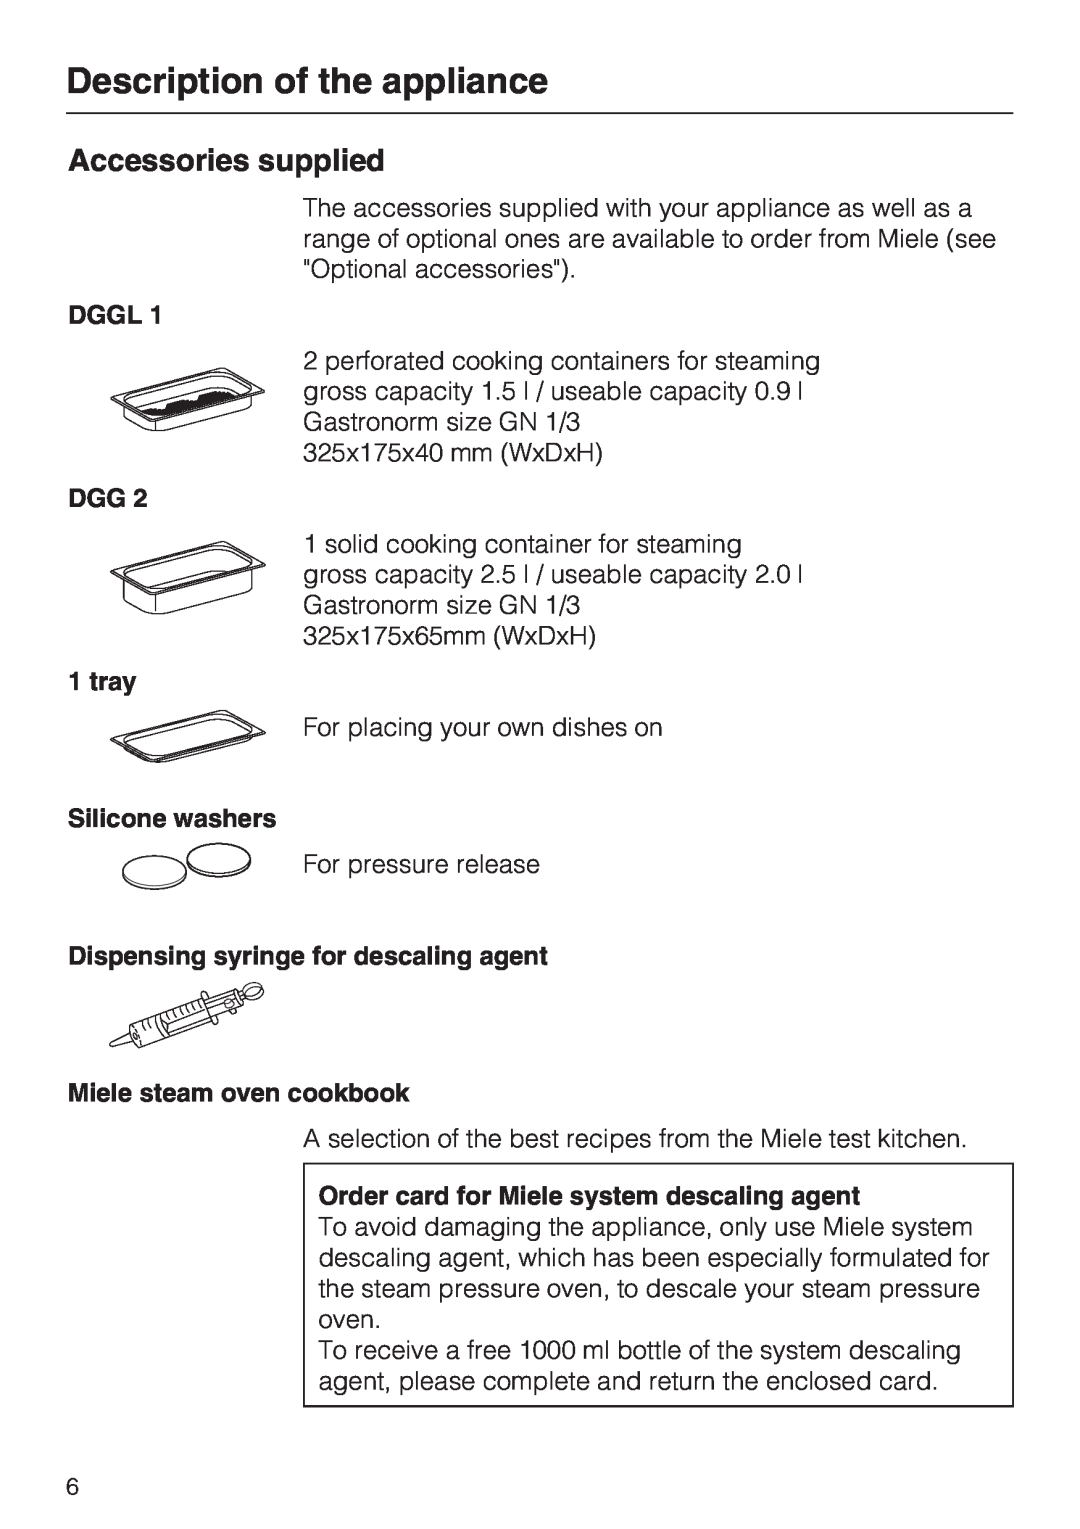 Miele DG 4164 L, DG 4064 Accessories supplied, Dggl, tray, Silicone washers, Dispensing syringe for descaling agent 